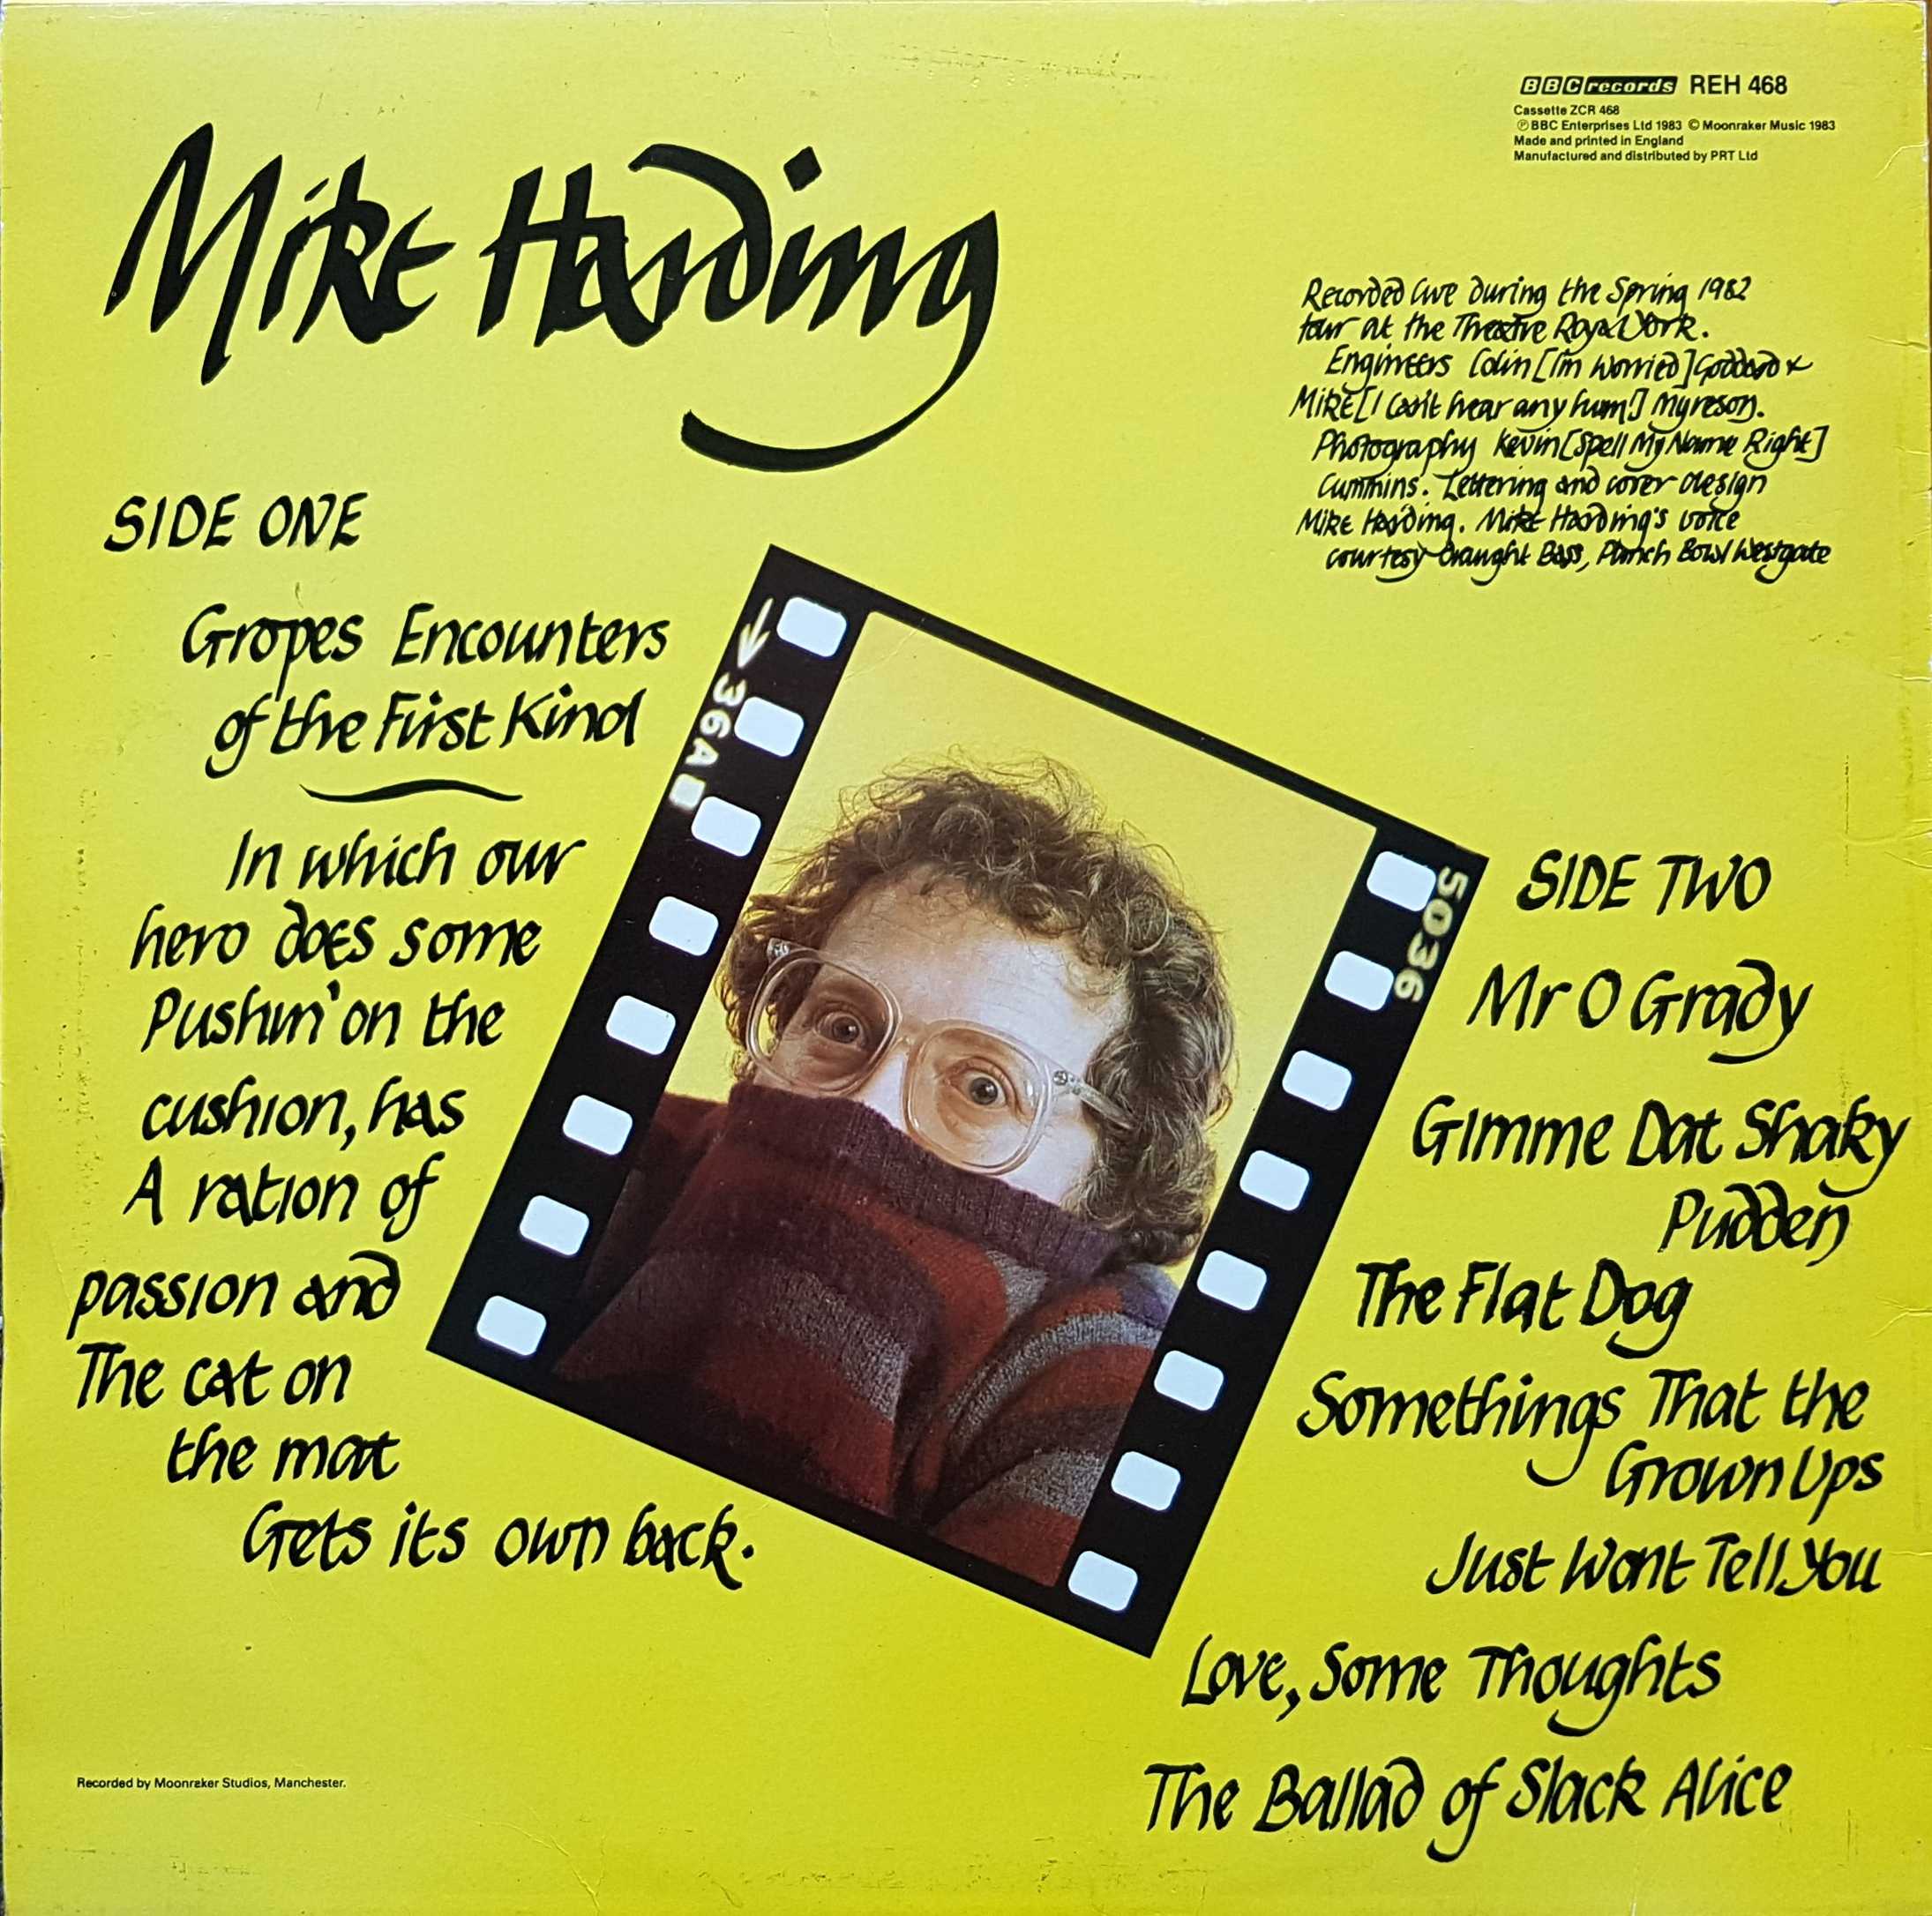 Picture of REH 468 Flat dogs and shaky pudden - Mike Harding by artist Mike Harding from the BBC records and Tapes library